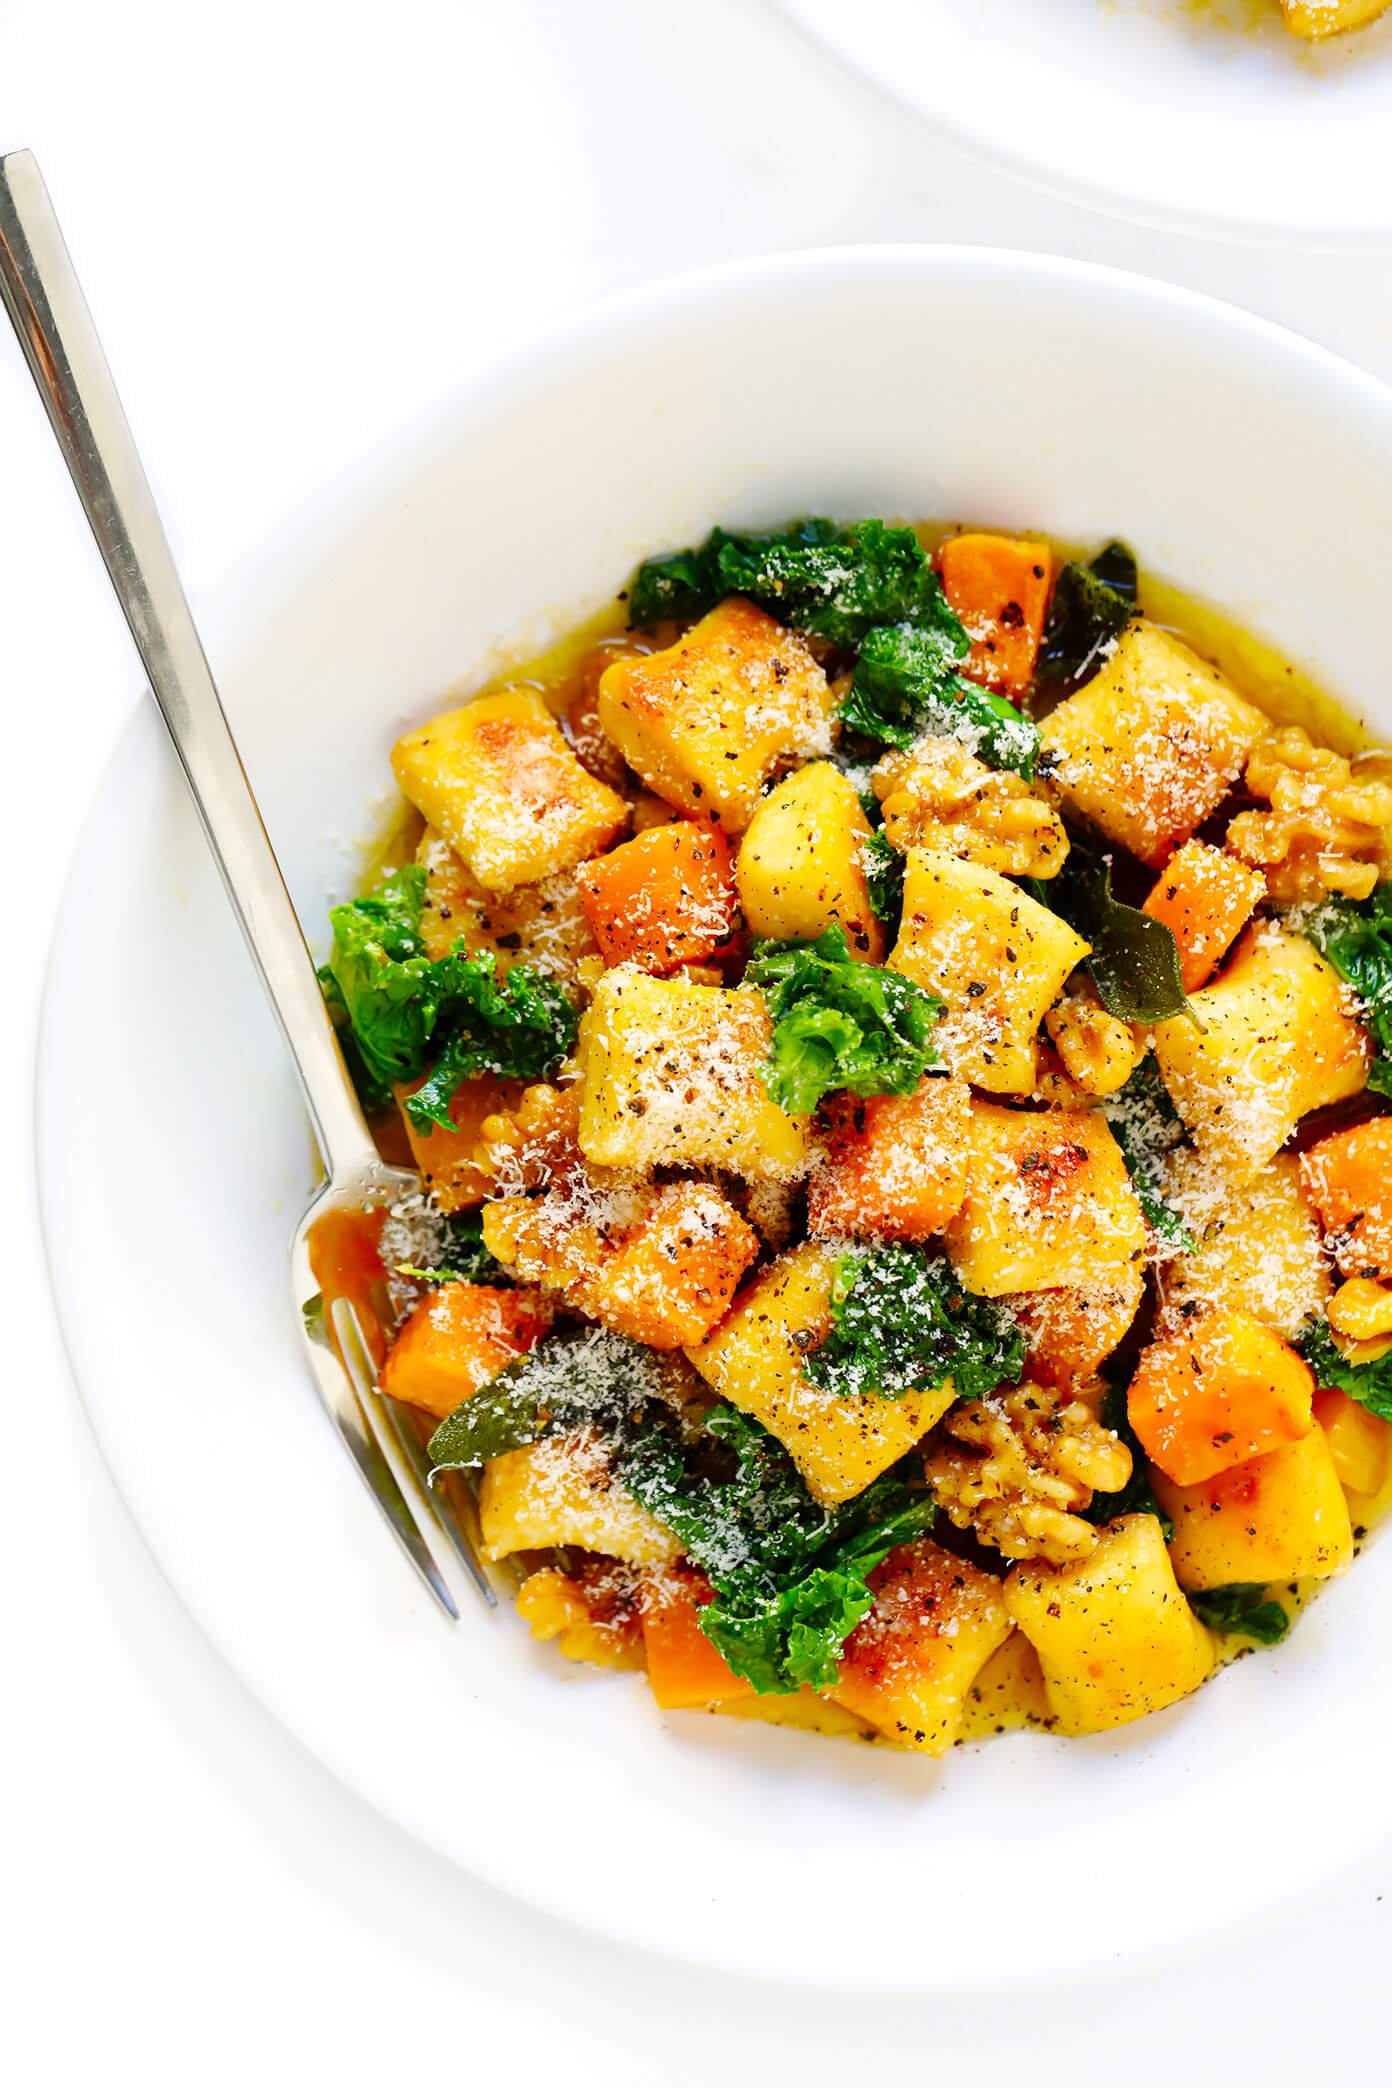 Autumn Gnocchi with Kale, Butternut Squash, and Brown Butter Sauce